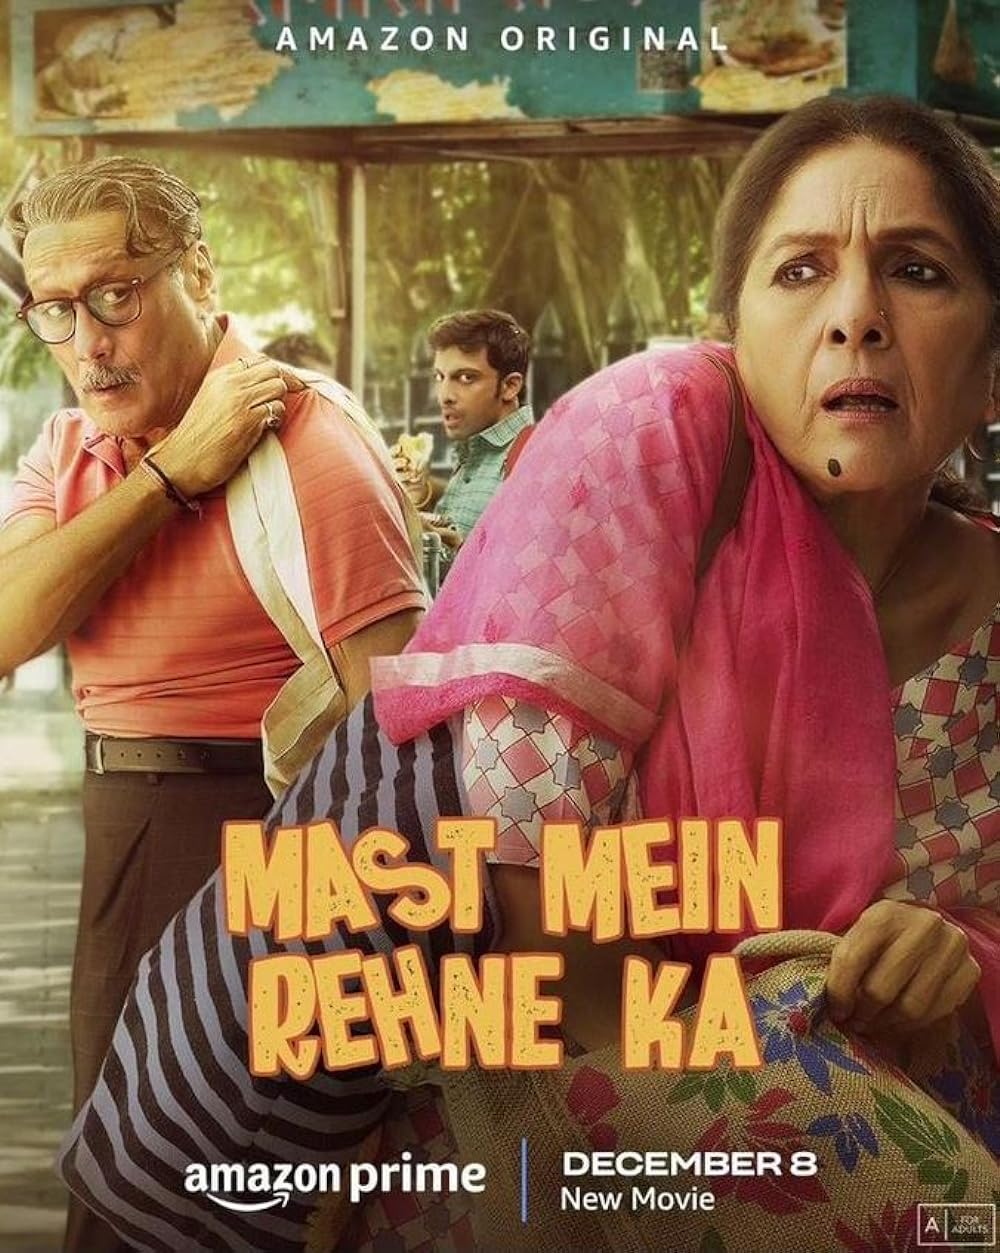 Mast Mein Rehne Ka (December 8) - Streaming on Prime Video This is a heartwarming narrative delving into the parallel universes of two distinct generations, each navigating its unique reservations and confronting the adversities of life. It is a beautifully crafted story based on universal themes of second chances in love and life, forgiveness, and redemption. 